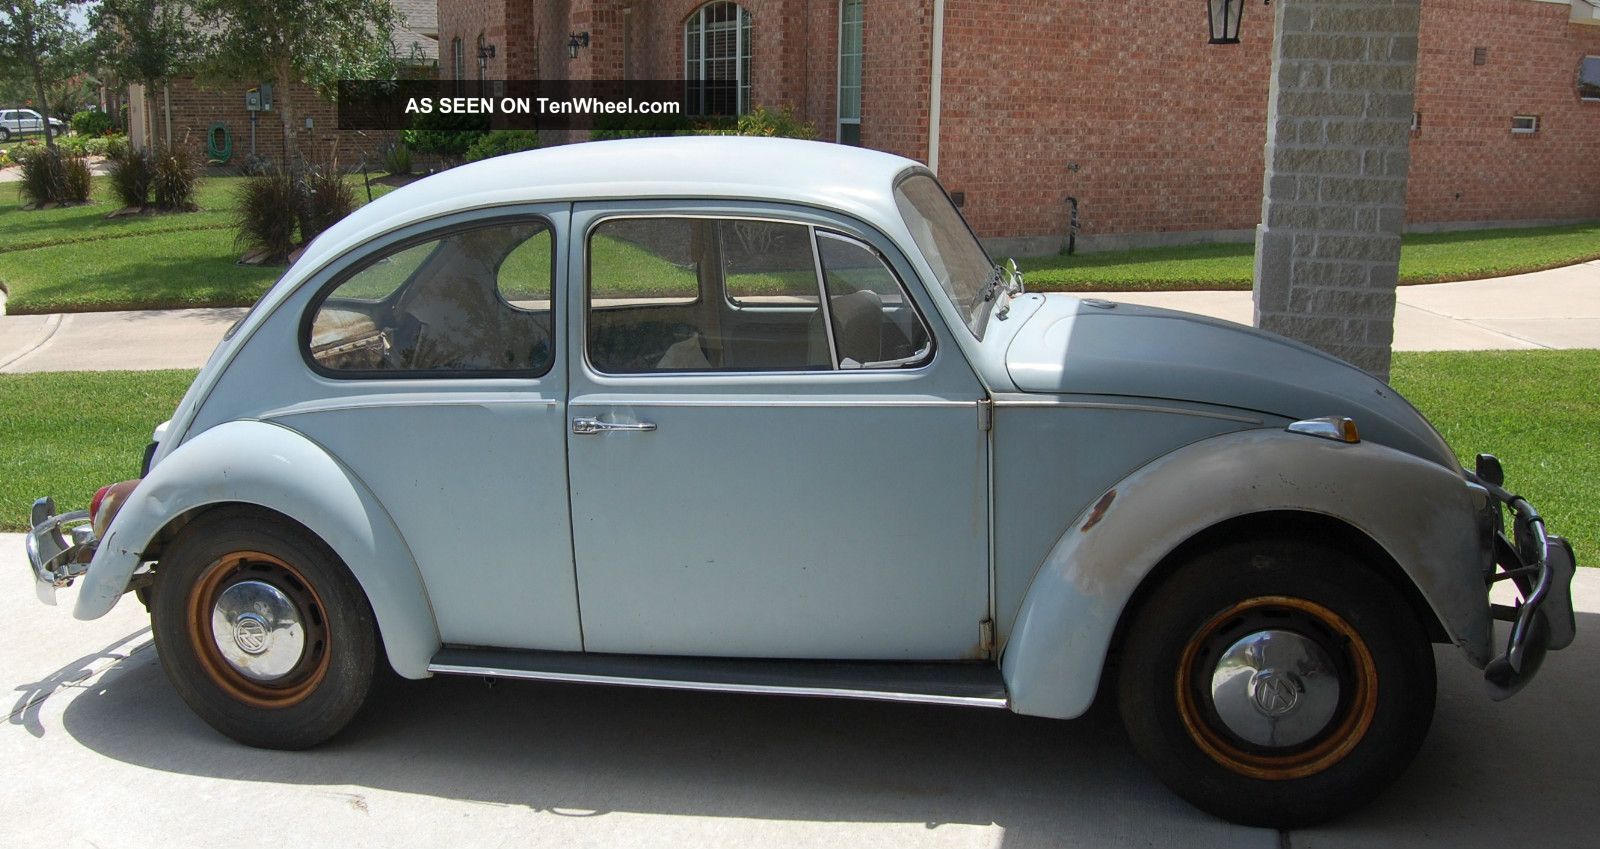 Air Cooled: Vw Air Cooled Engines For Sale Craigslist